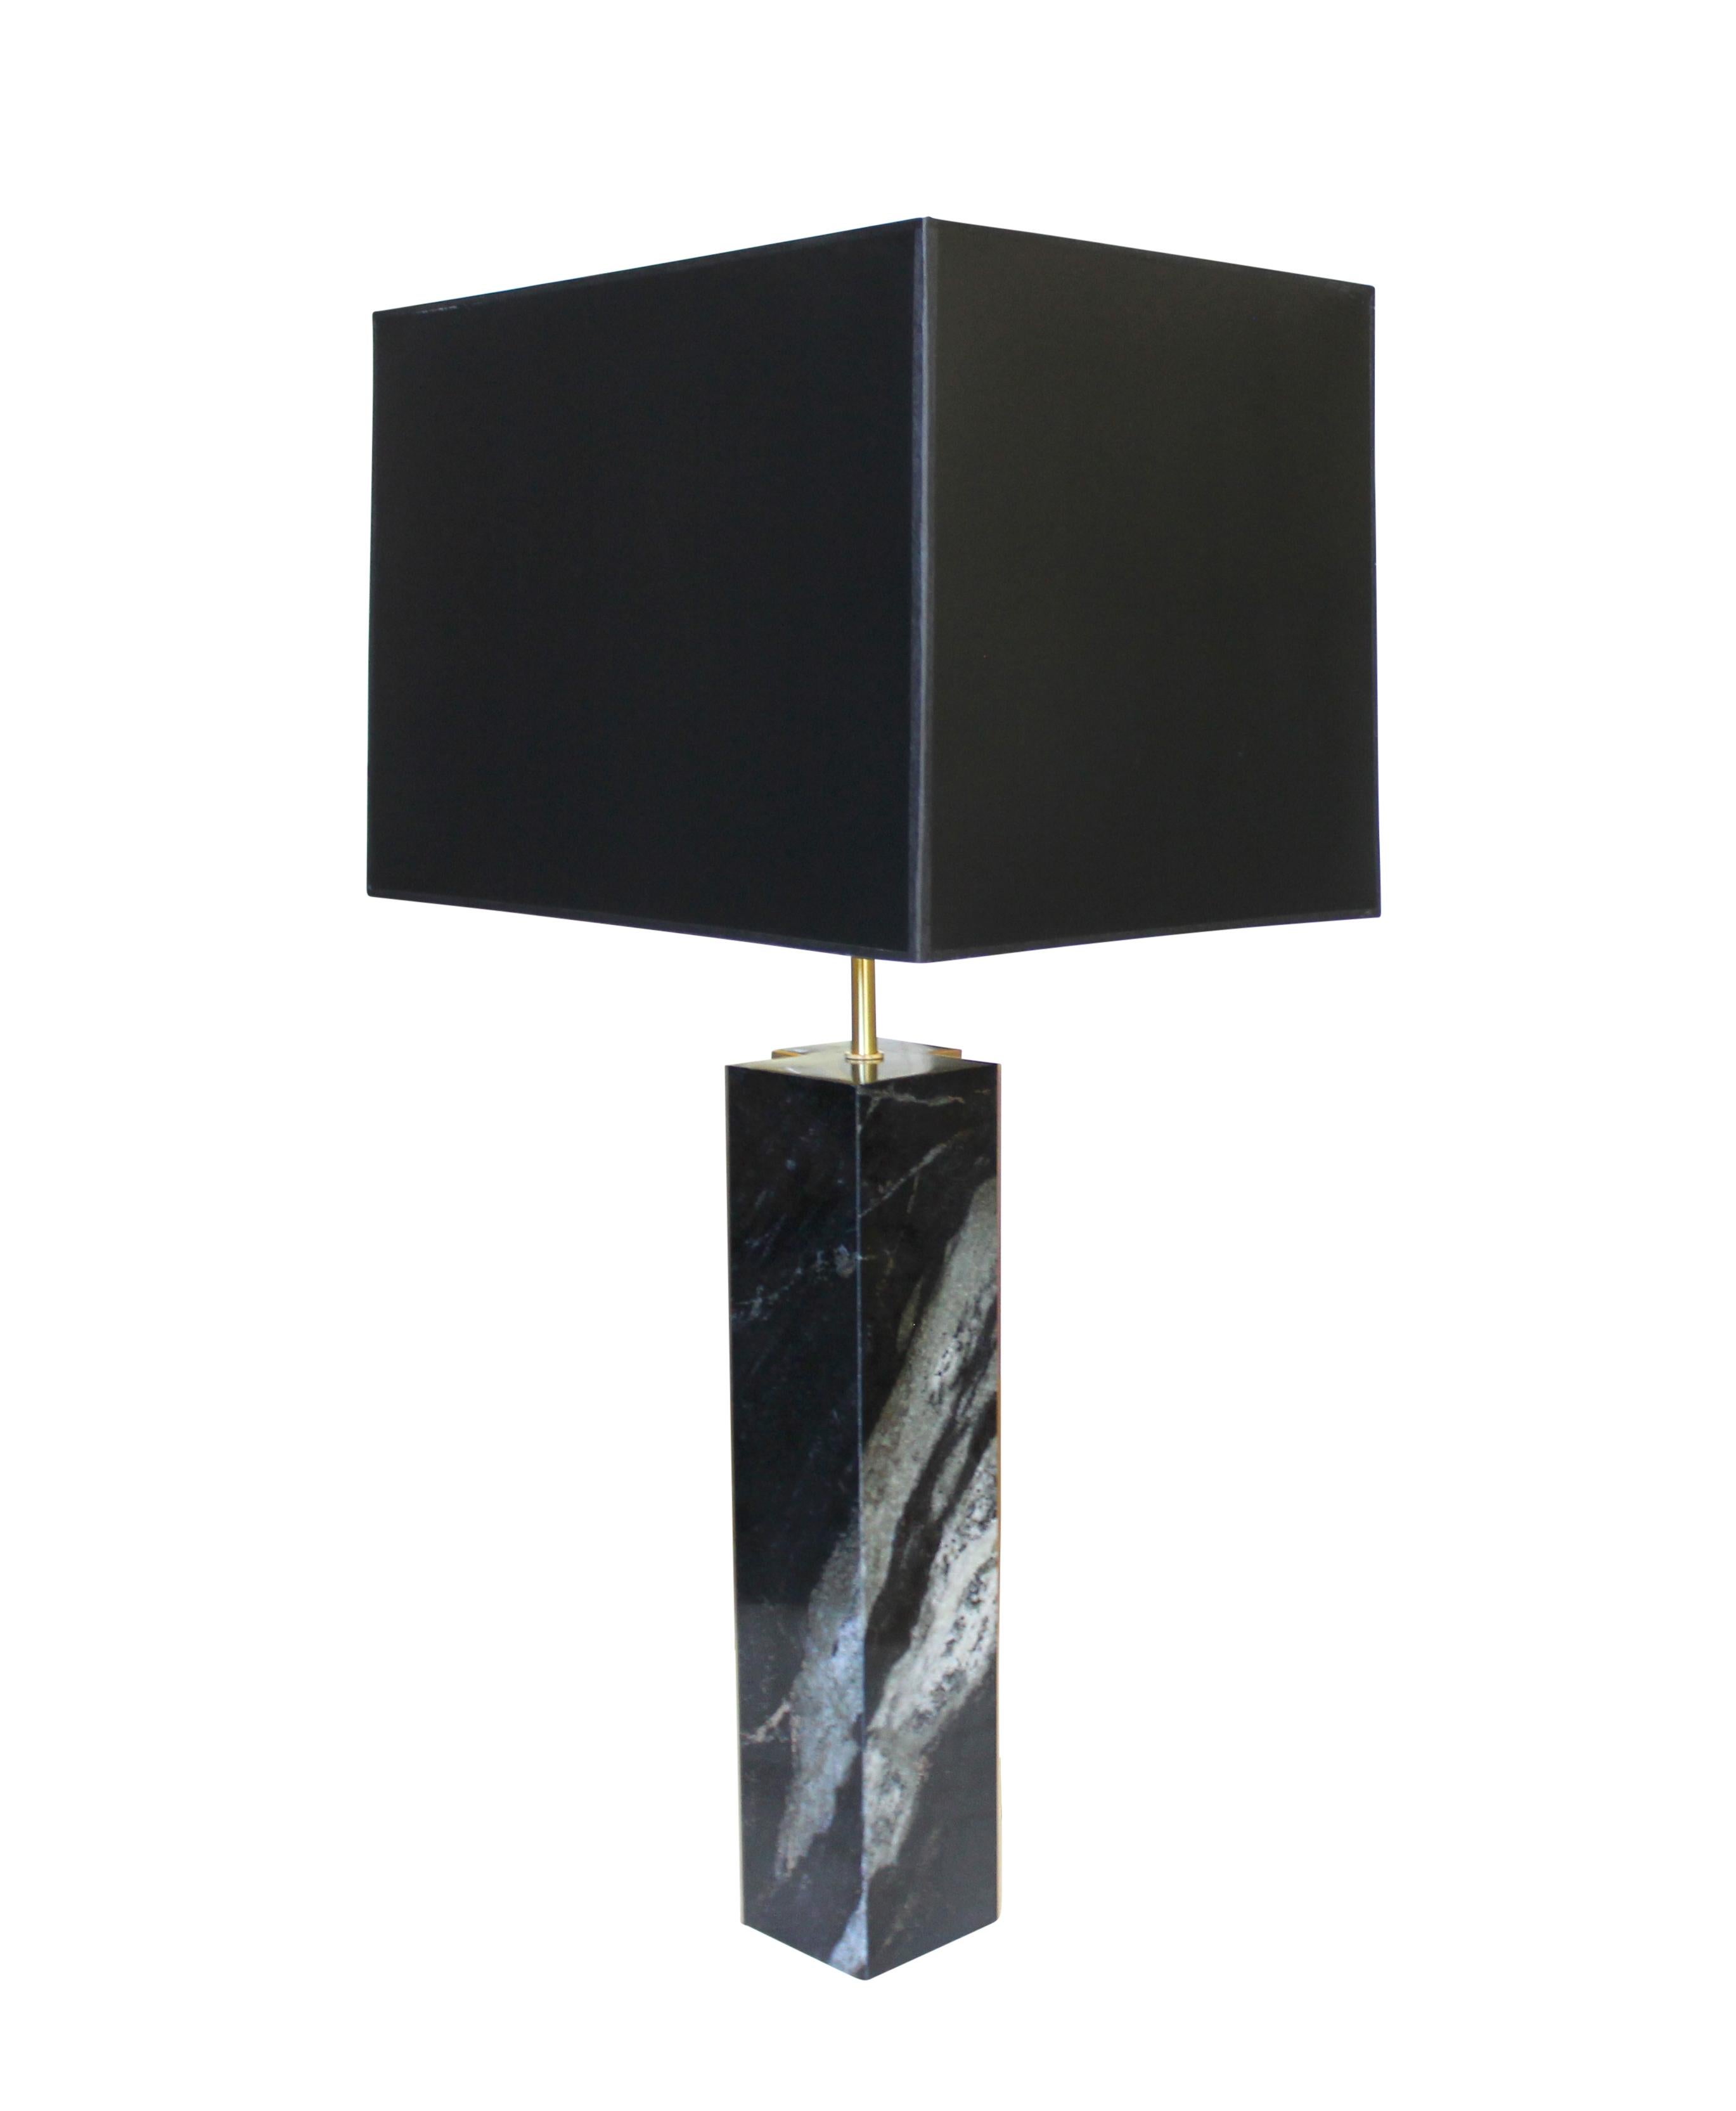 Black and white dalamata quartzite table lamp with bronze accents and black paper shade with gold interior.
Sold with or without shade.